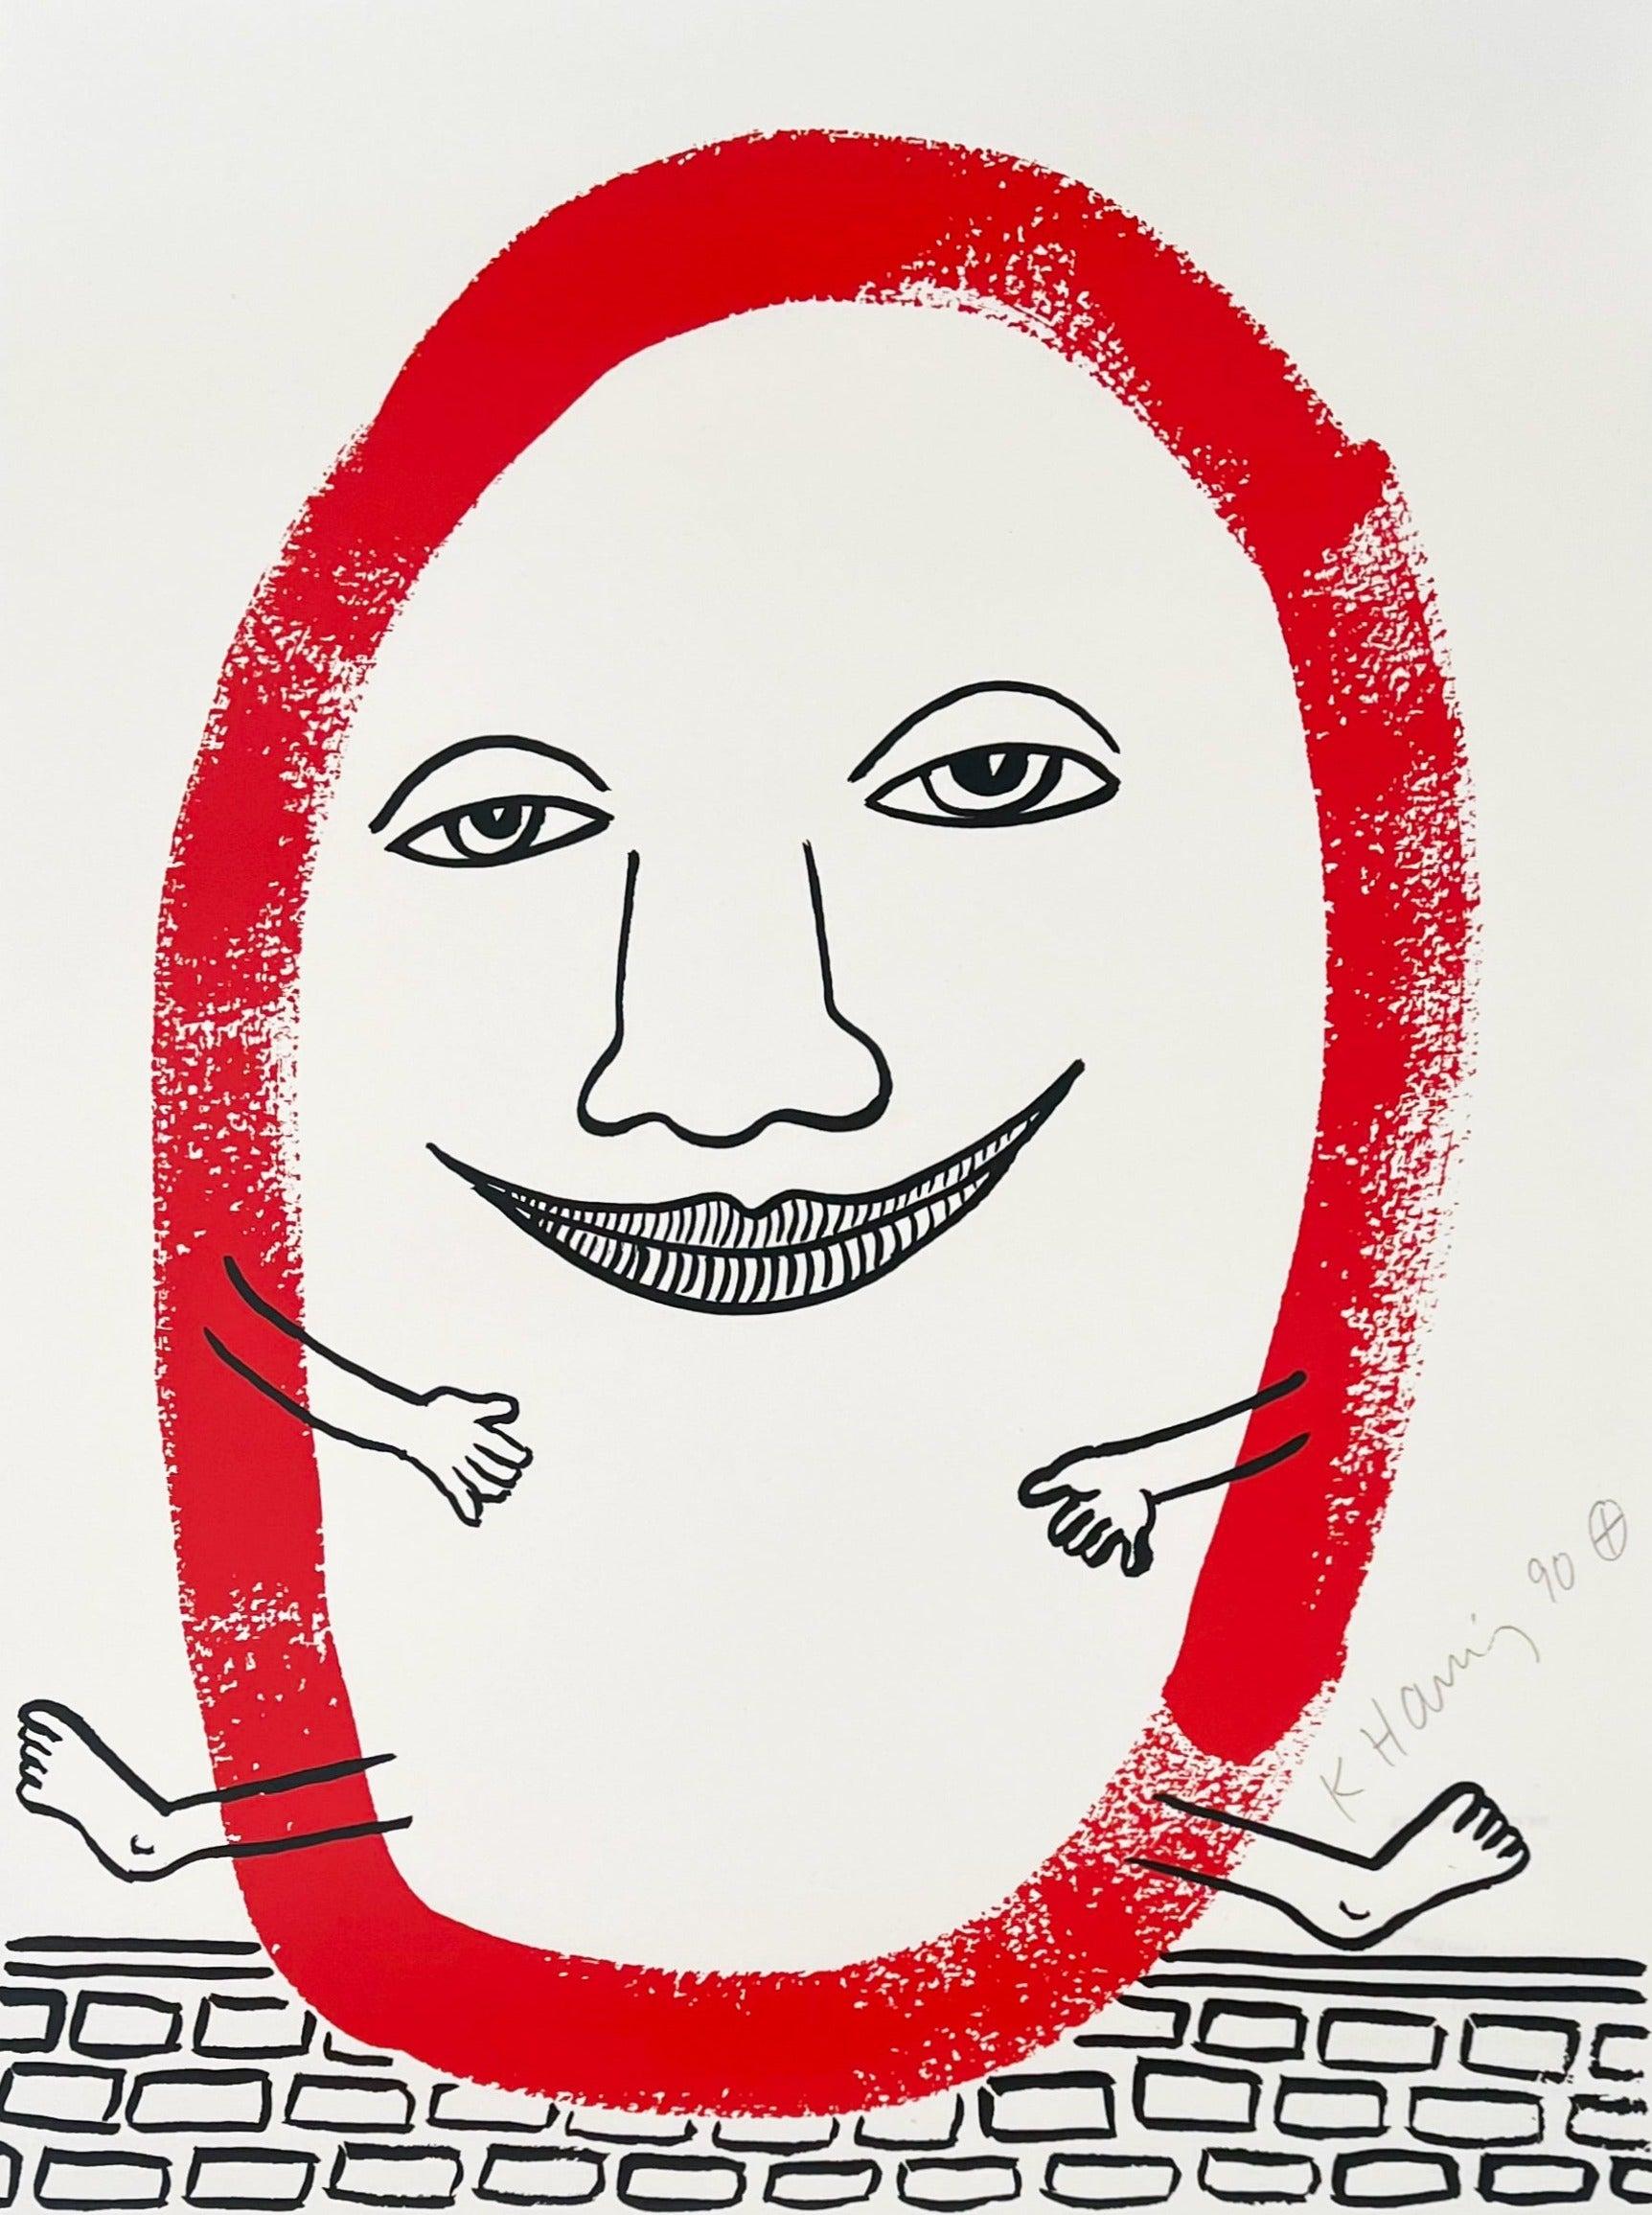 Keith Haring Figurative Print - The Story of Red and Blue: Plate 5